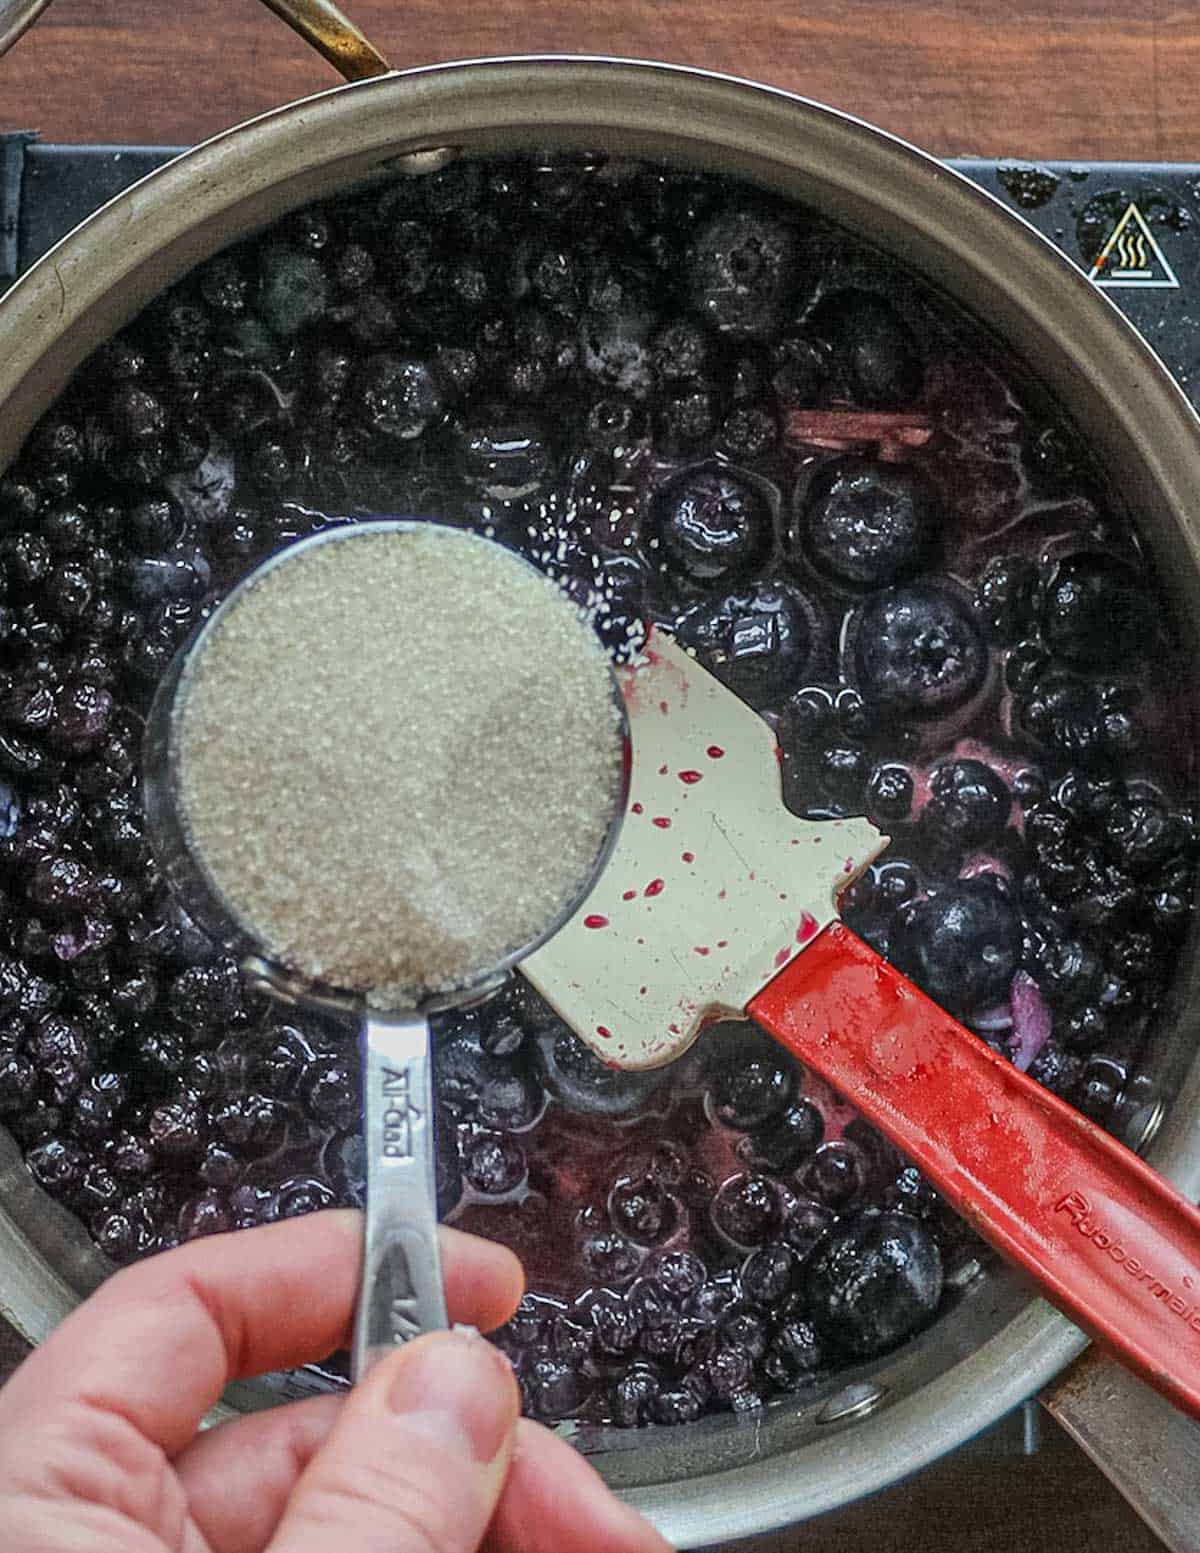 Adding a cup of sugar to a pan of cooking blueberry sauce.